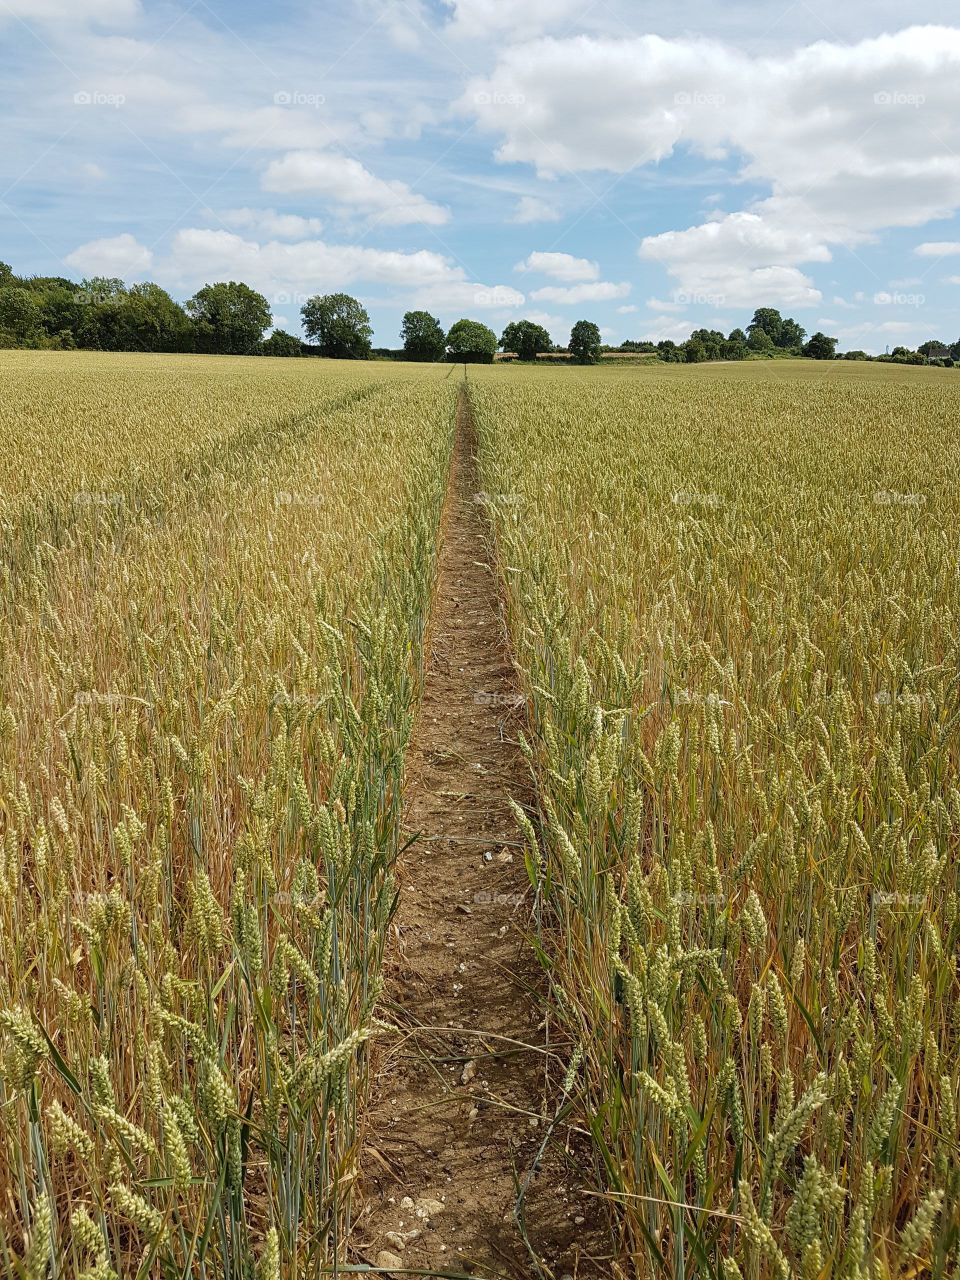 A long, straight path through an overwhelming army of wheat. 🌾

You might get your weetabix from here! 💁‍♂️